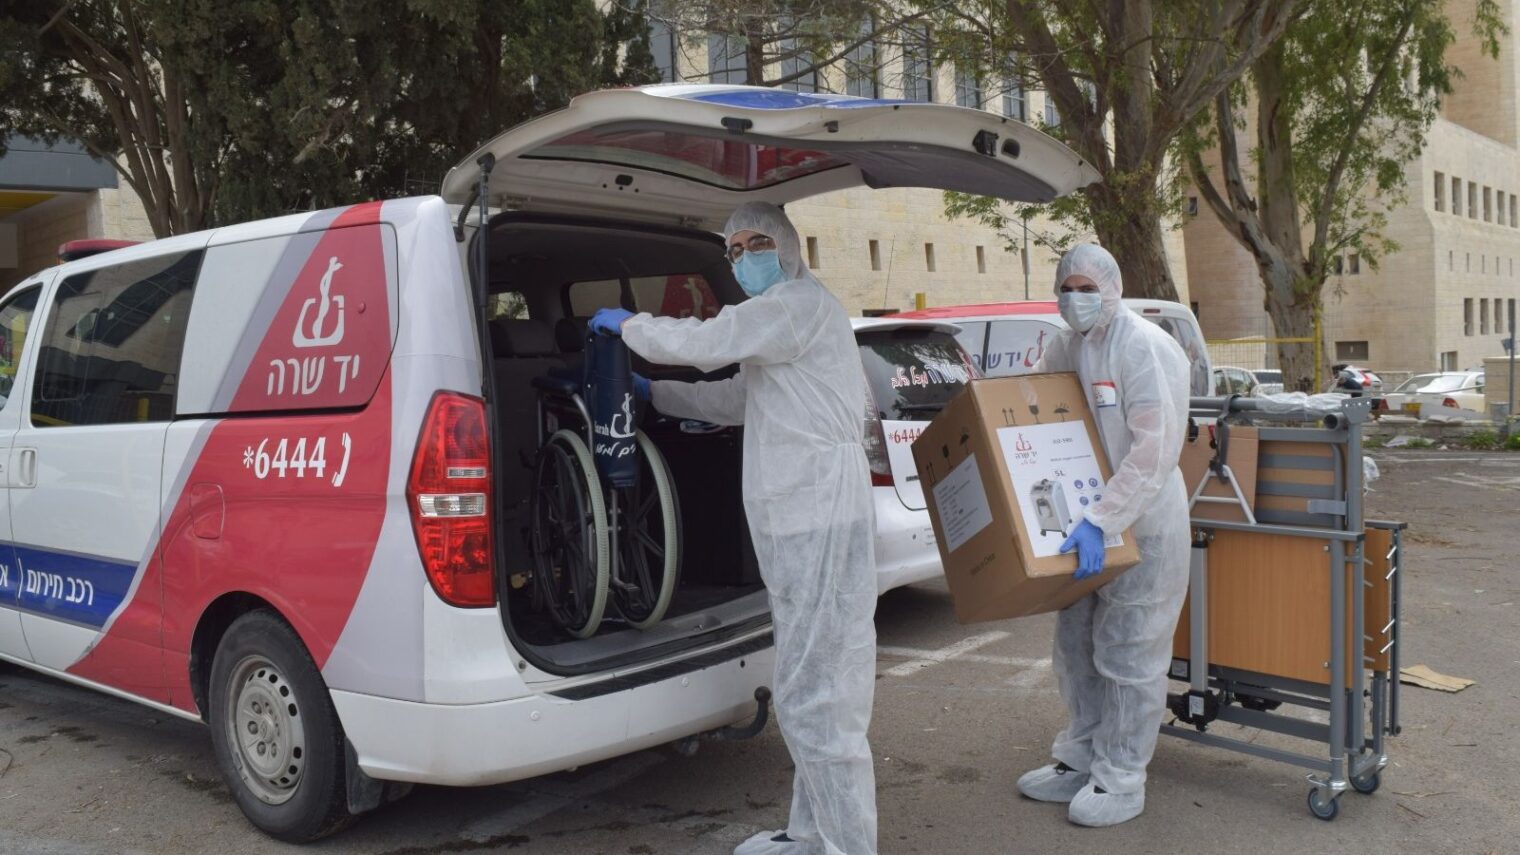 Yad Sarah personnel suit up in protective gear to supply those quarantined at home with the medical supplies and services they require. Photo: courtesy